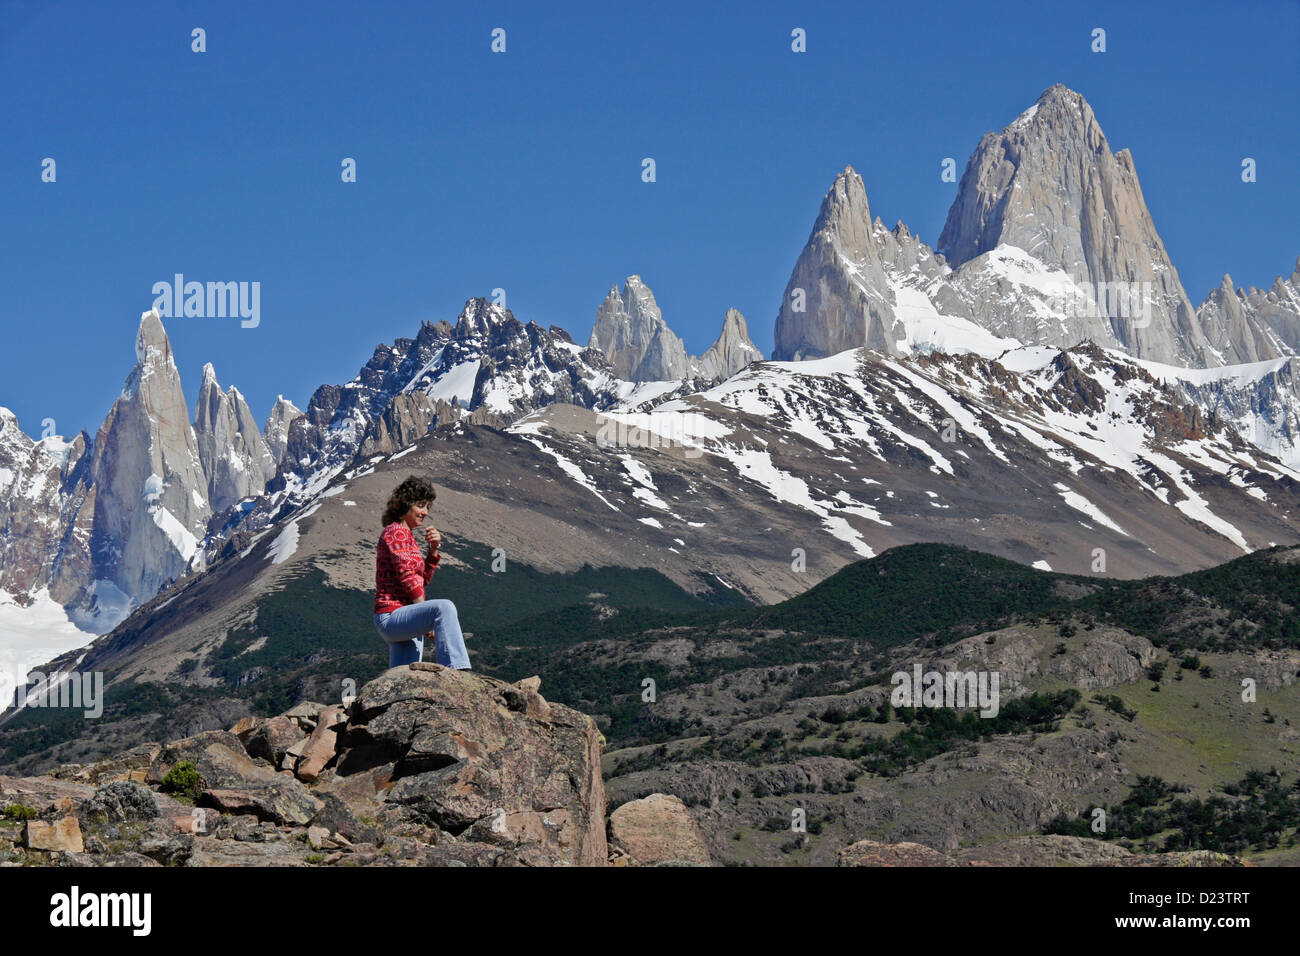 Hiker and the Fitz Roy Range of the Andes, Los Glaciares NP, Patagonia, Argentina Stock Photo